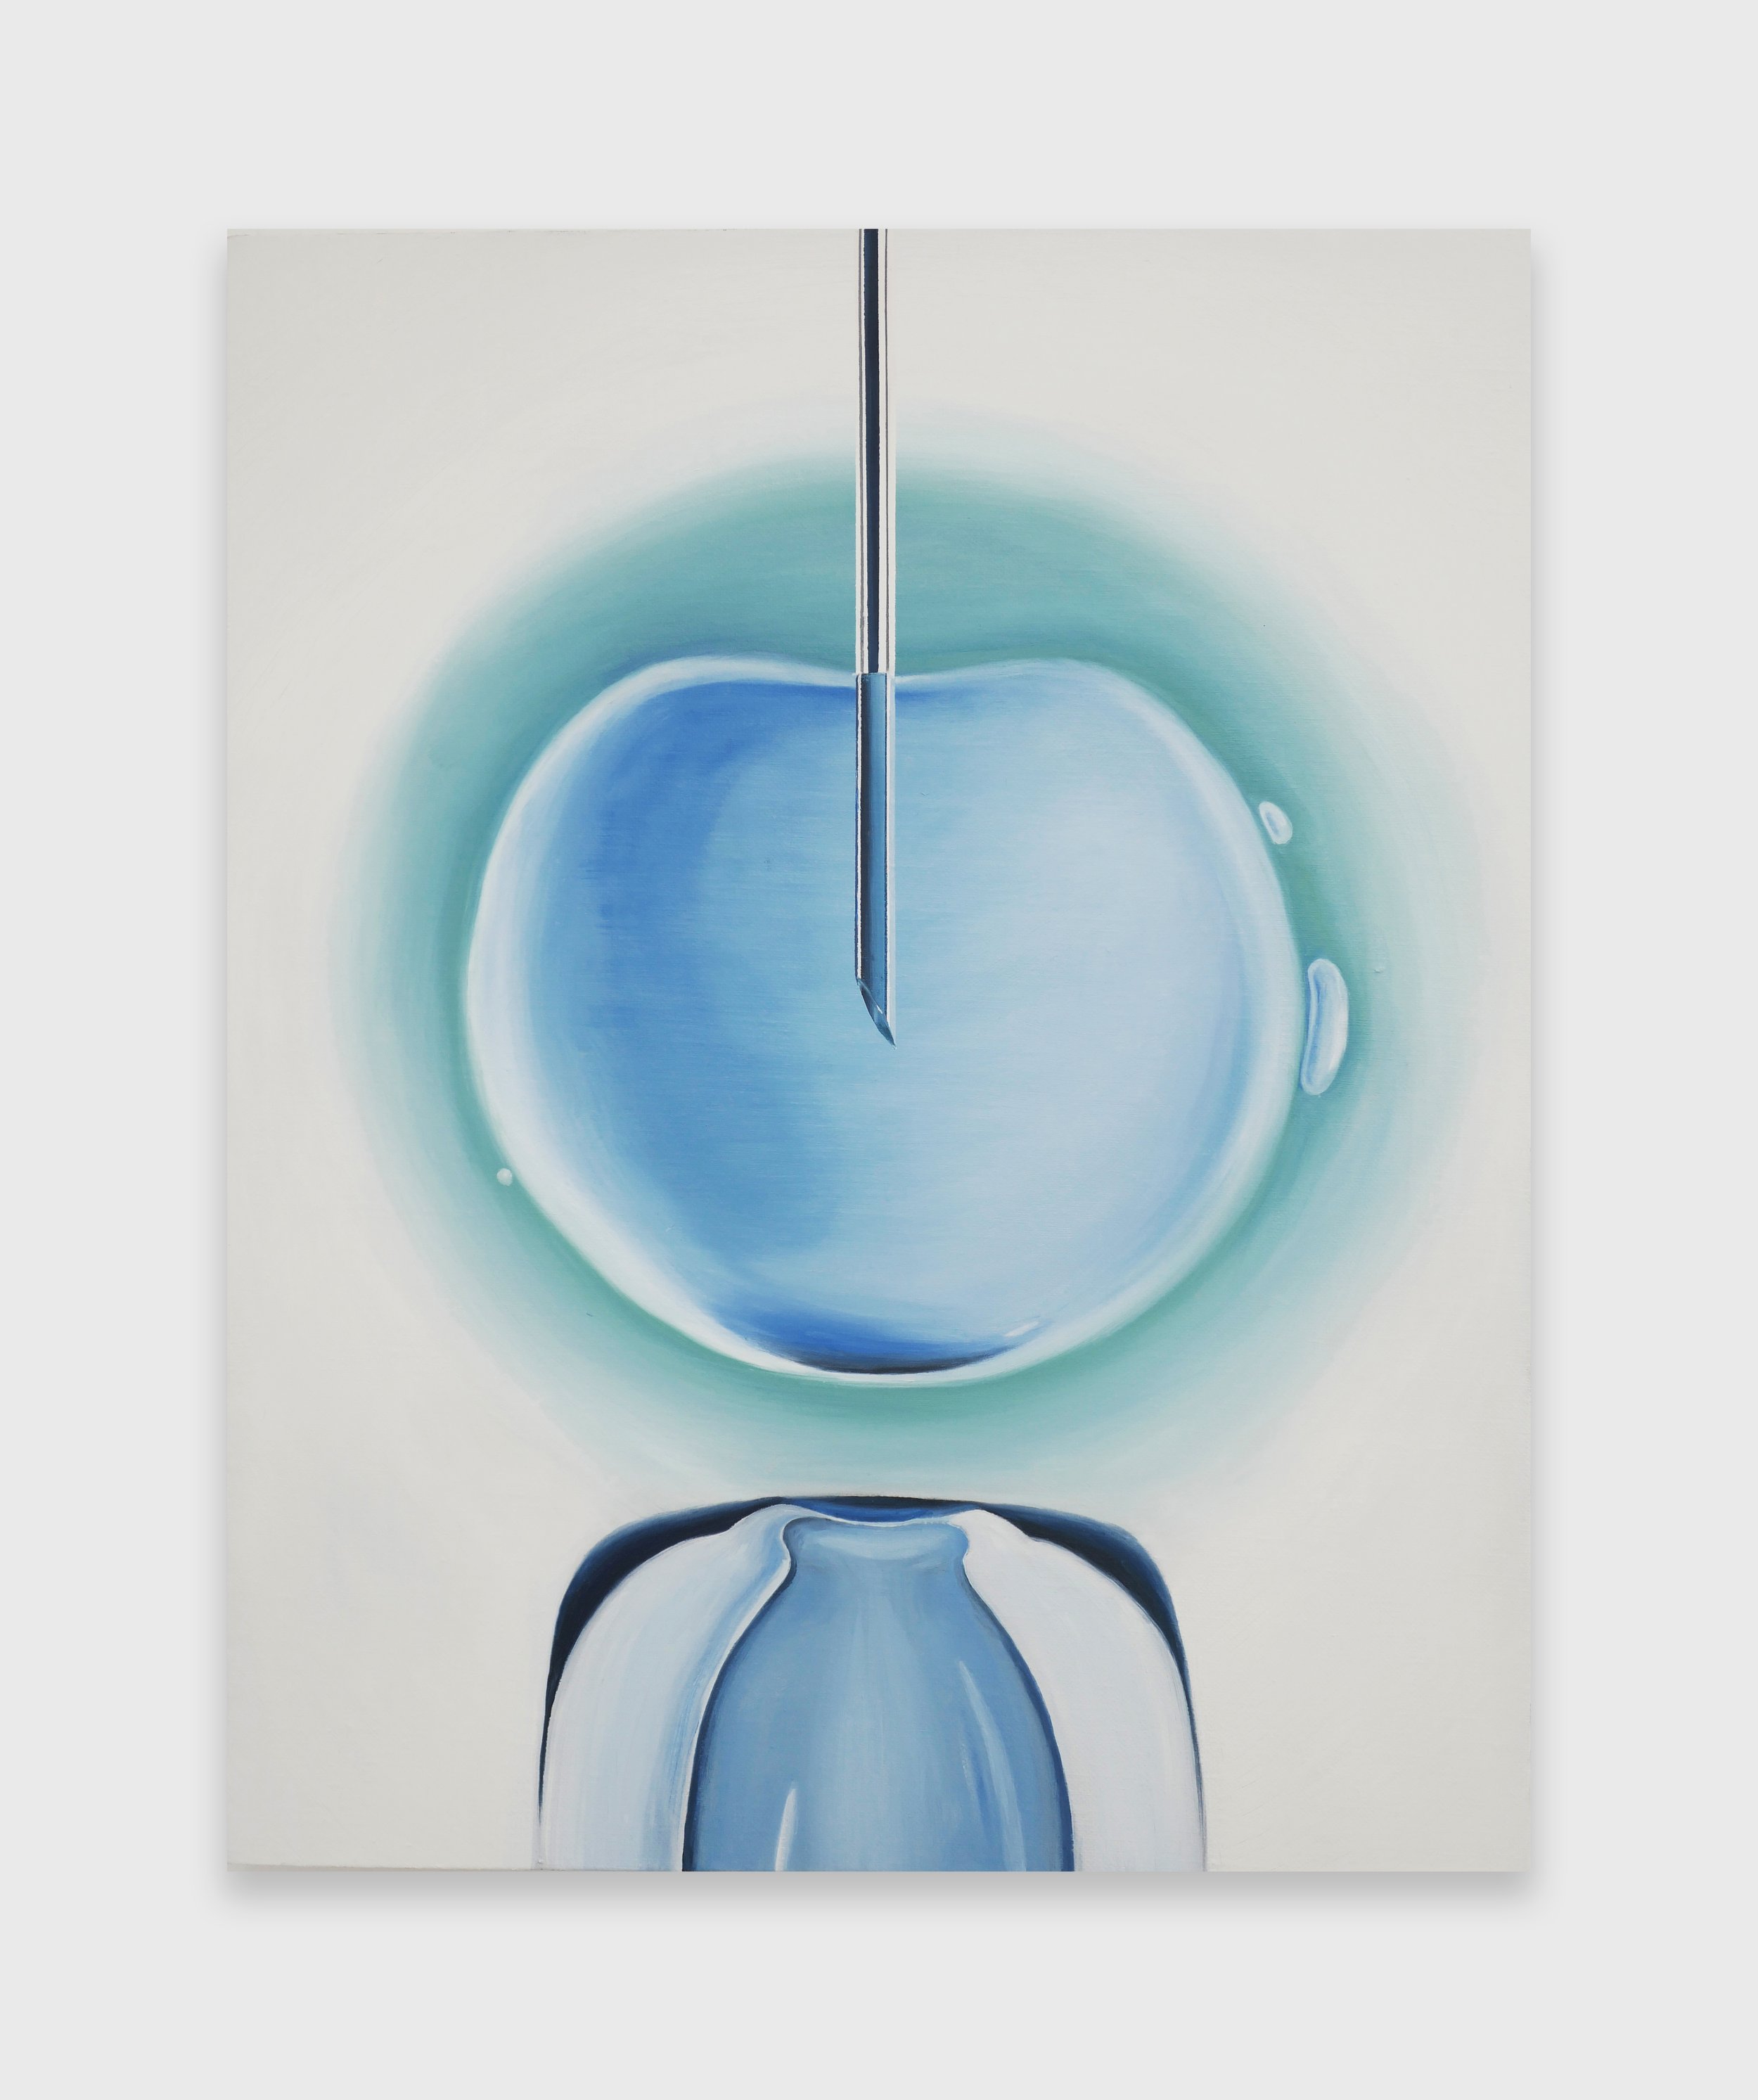   IVF,  2020  Oil on linen  20 x 16 inches / 50.8 x 40.6 cm   